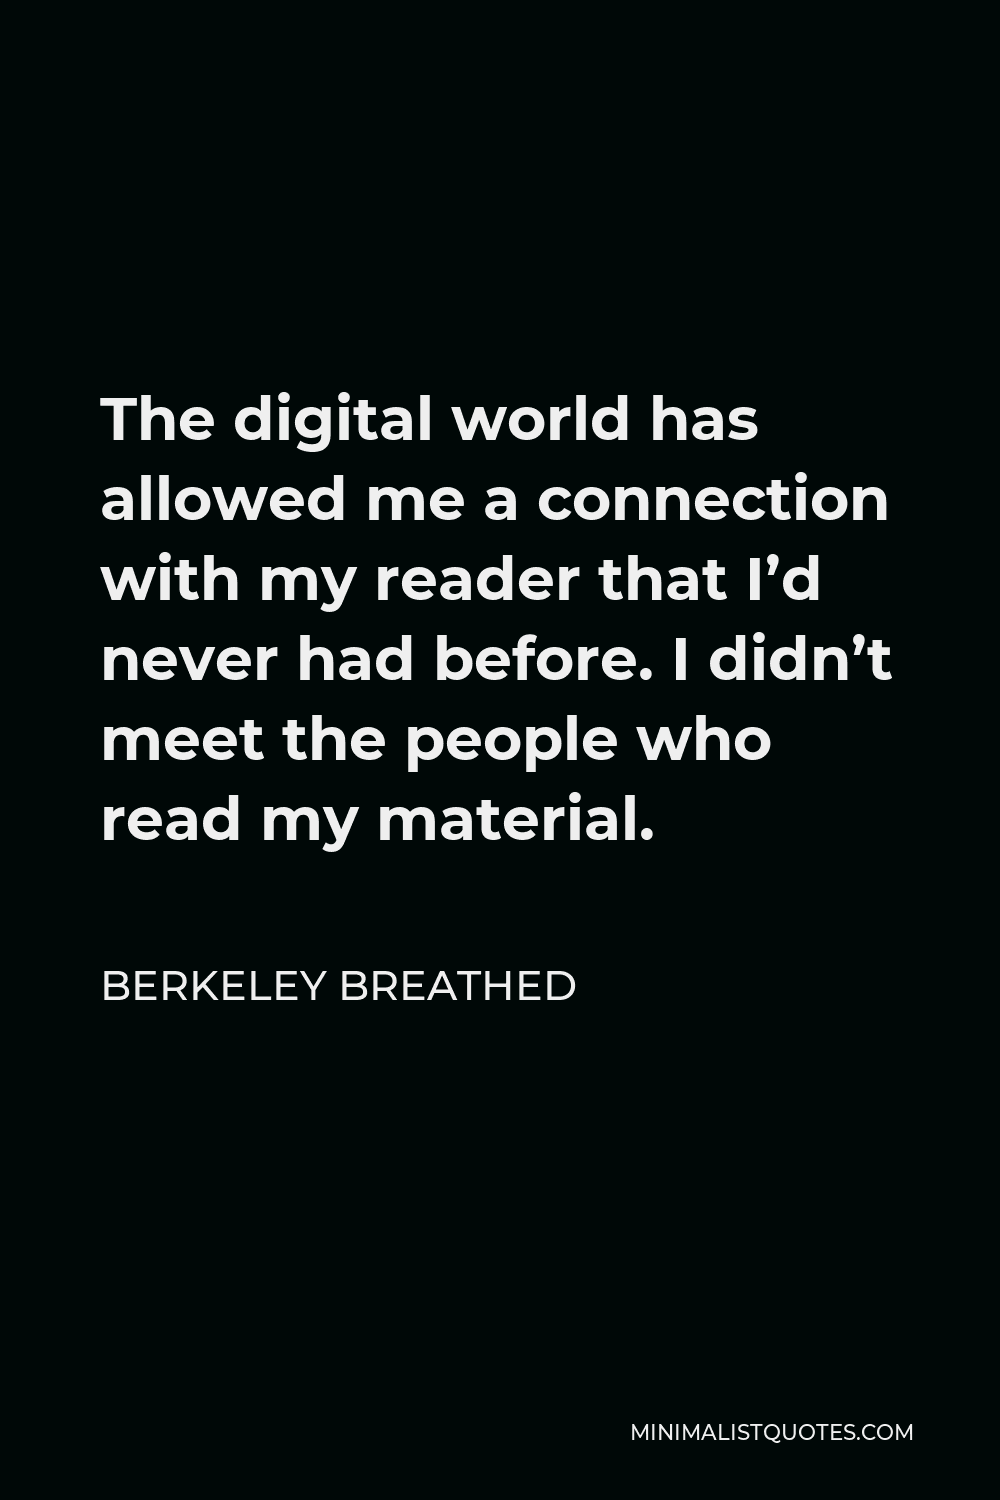 Berkeley Breathed Quote - The digital world has allowed me a connection with my reader that I’d never had before. I didn’t meet the people who read my material.